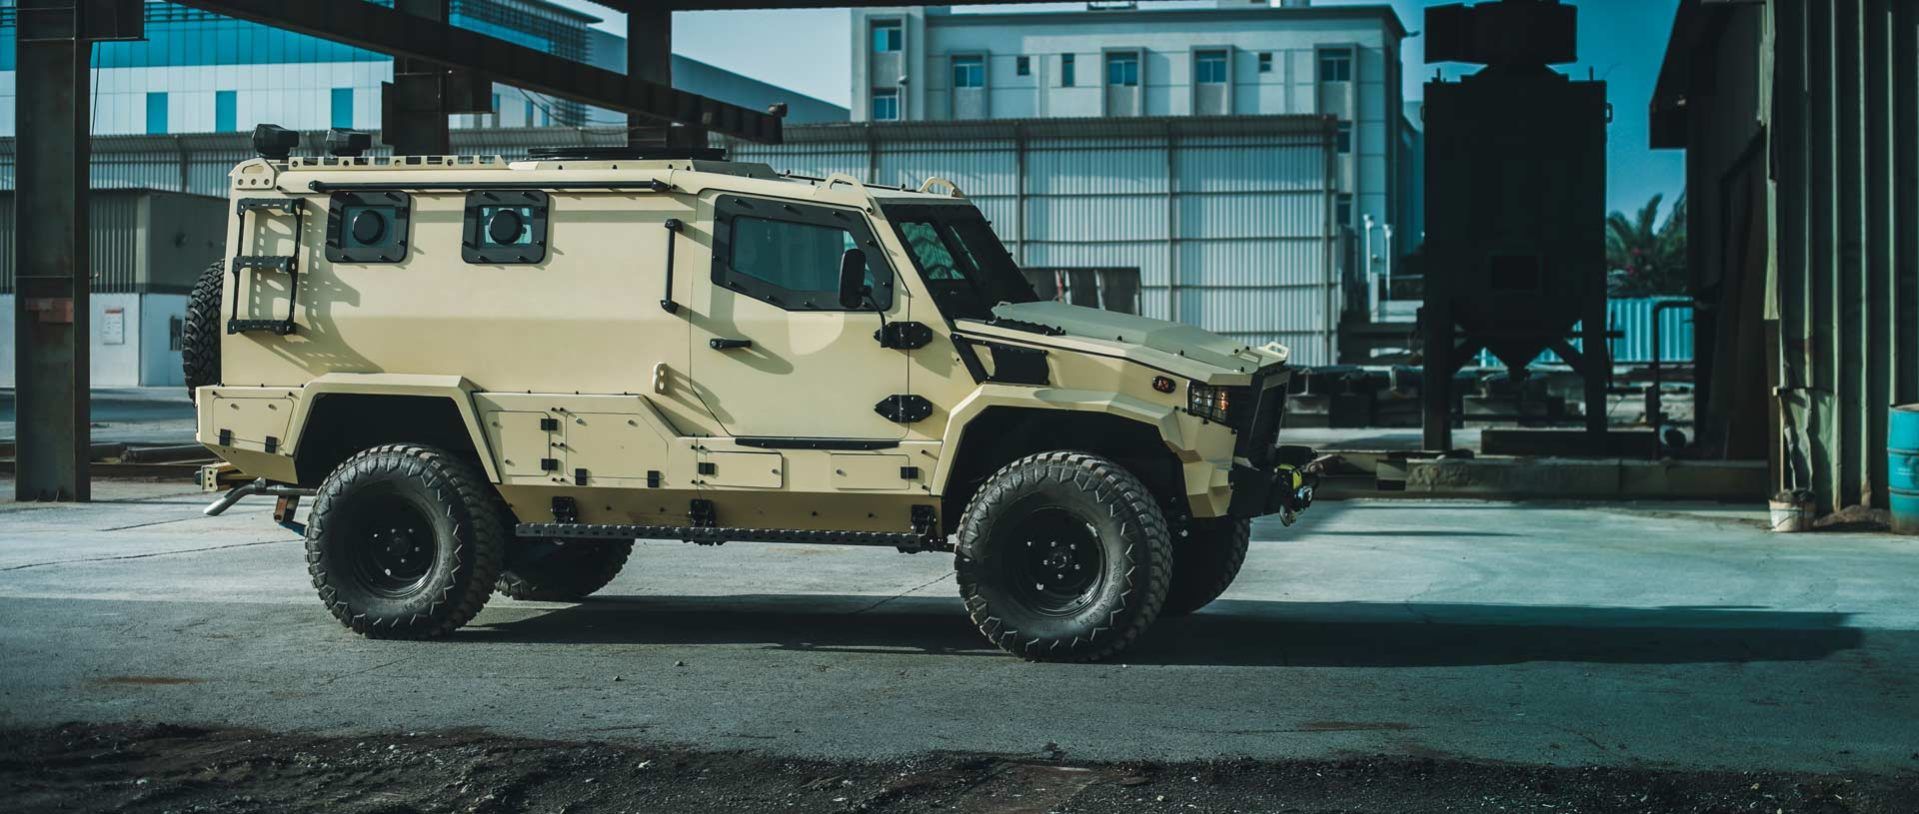 Armored Vehicle Bulletproof Car APC Spare Parts & Accessories